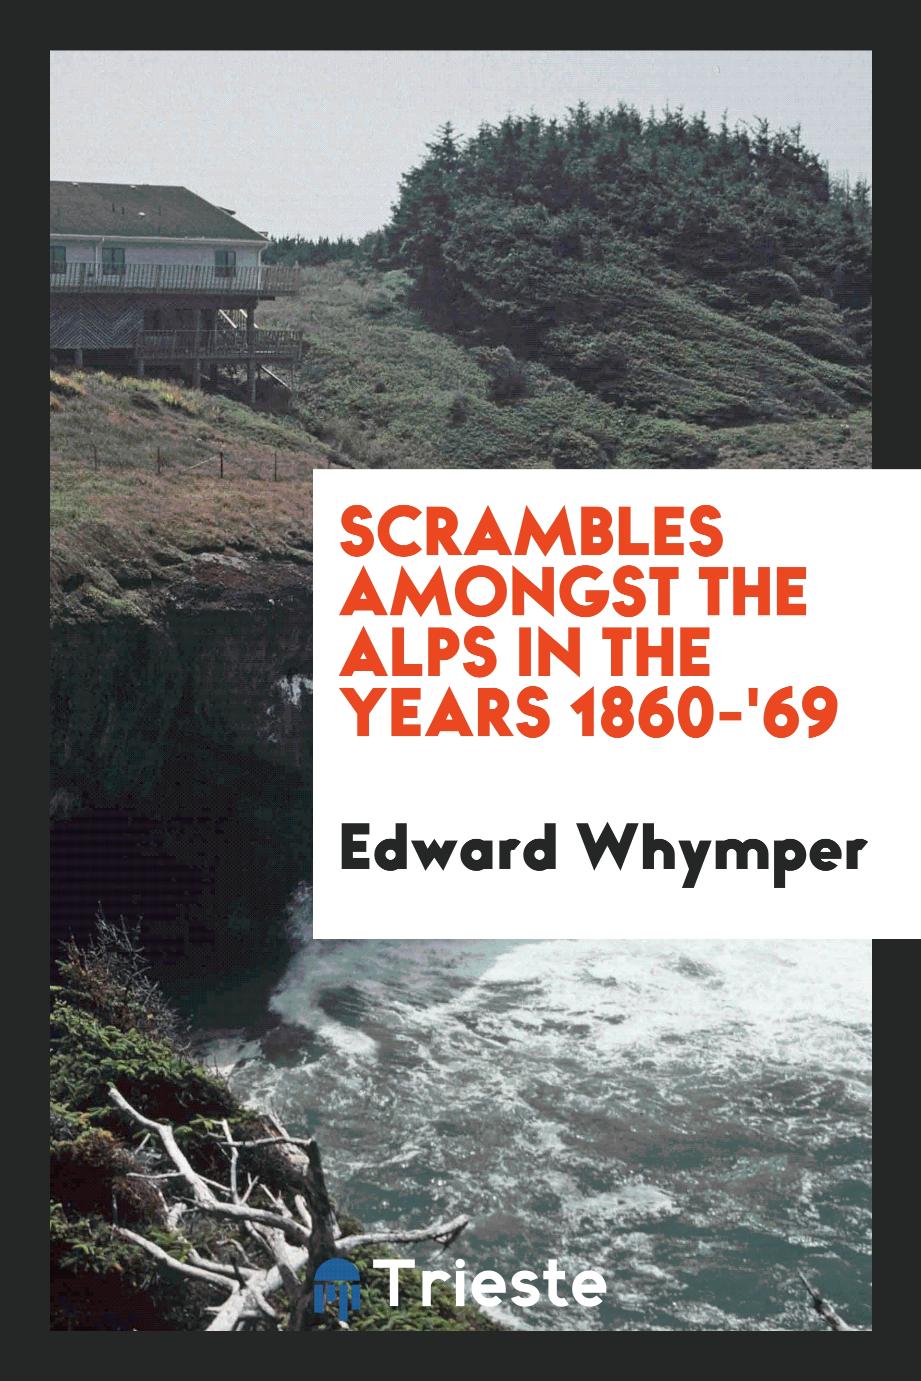 Scrambles amongst the Alps in the years 1860-'69